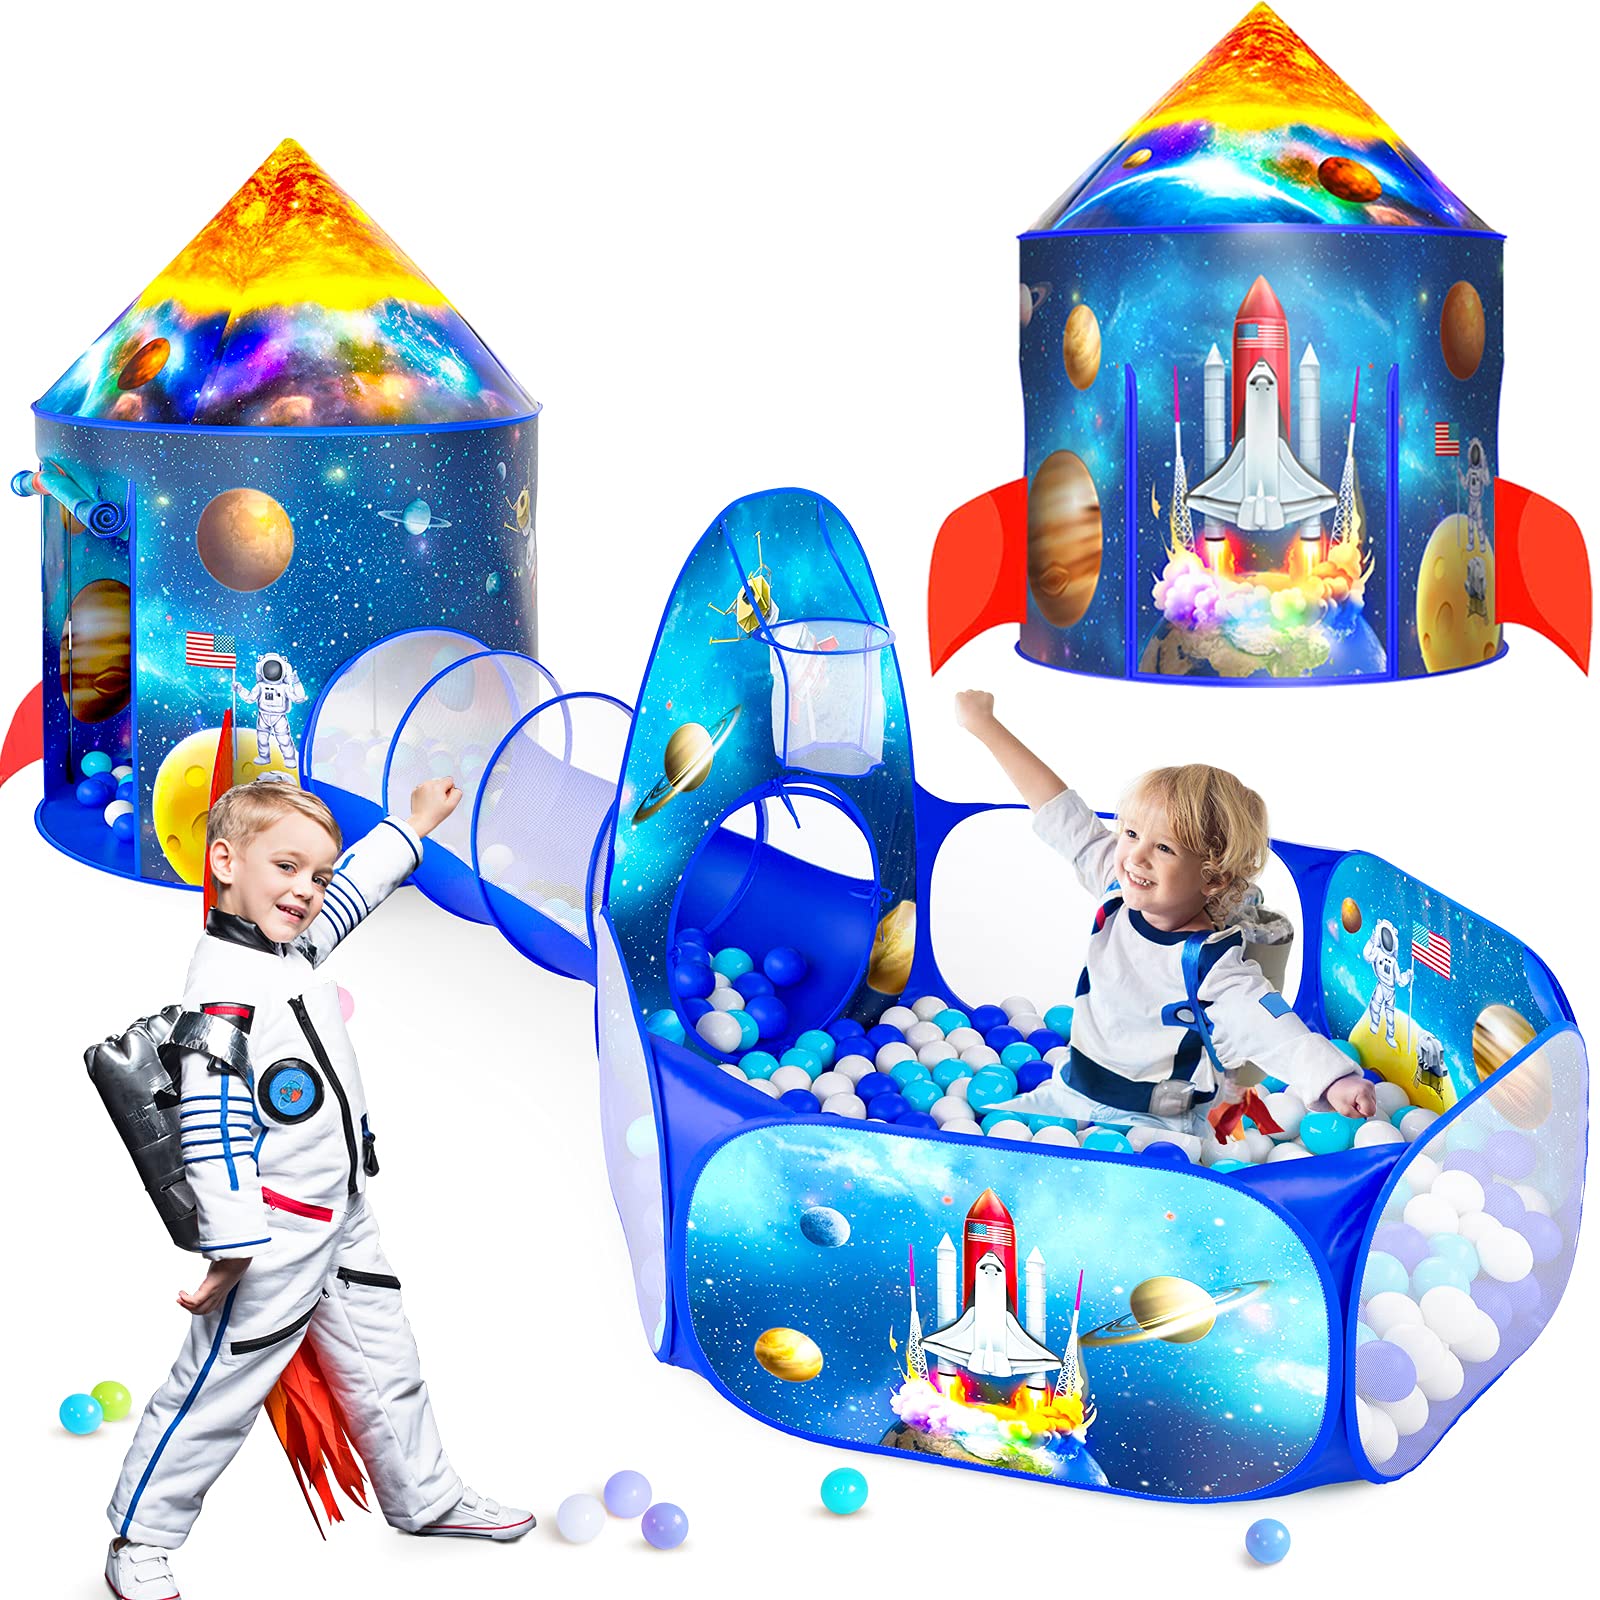 Geerwest 3Pc Ball Pits For Toddlers With Kids Play Tent And Kids Tunnel For Boys Girls, Baby Pop Up Playhouse Toy For Indooroutd